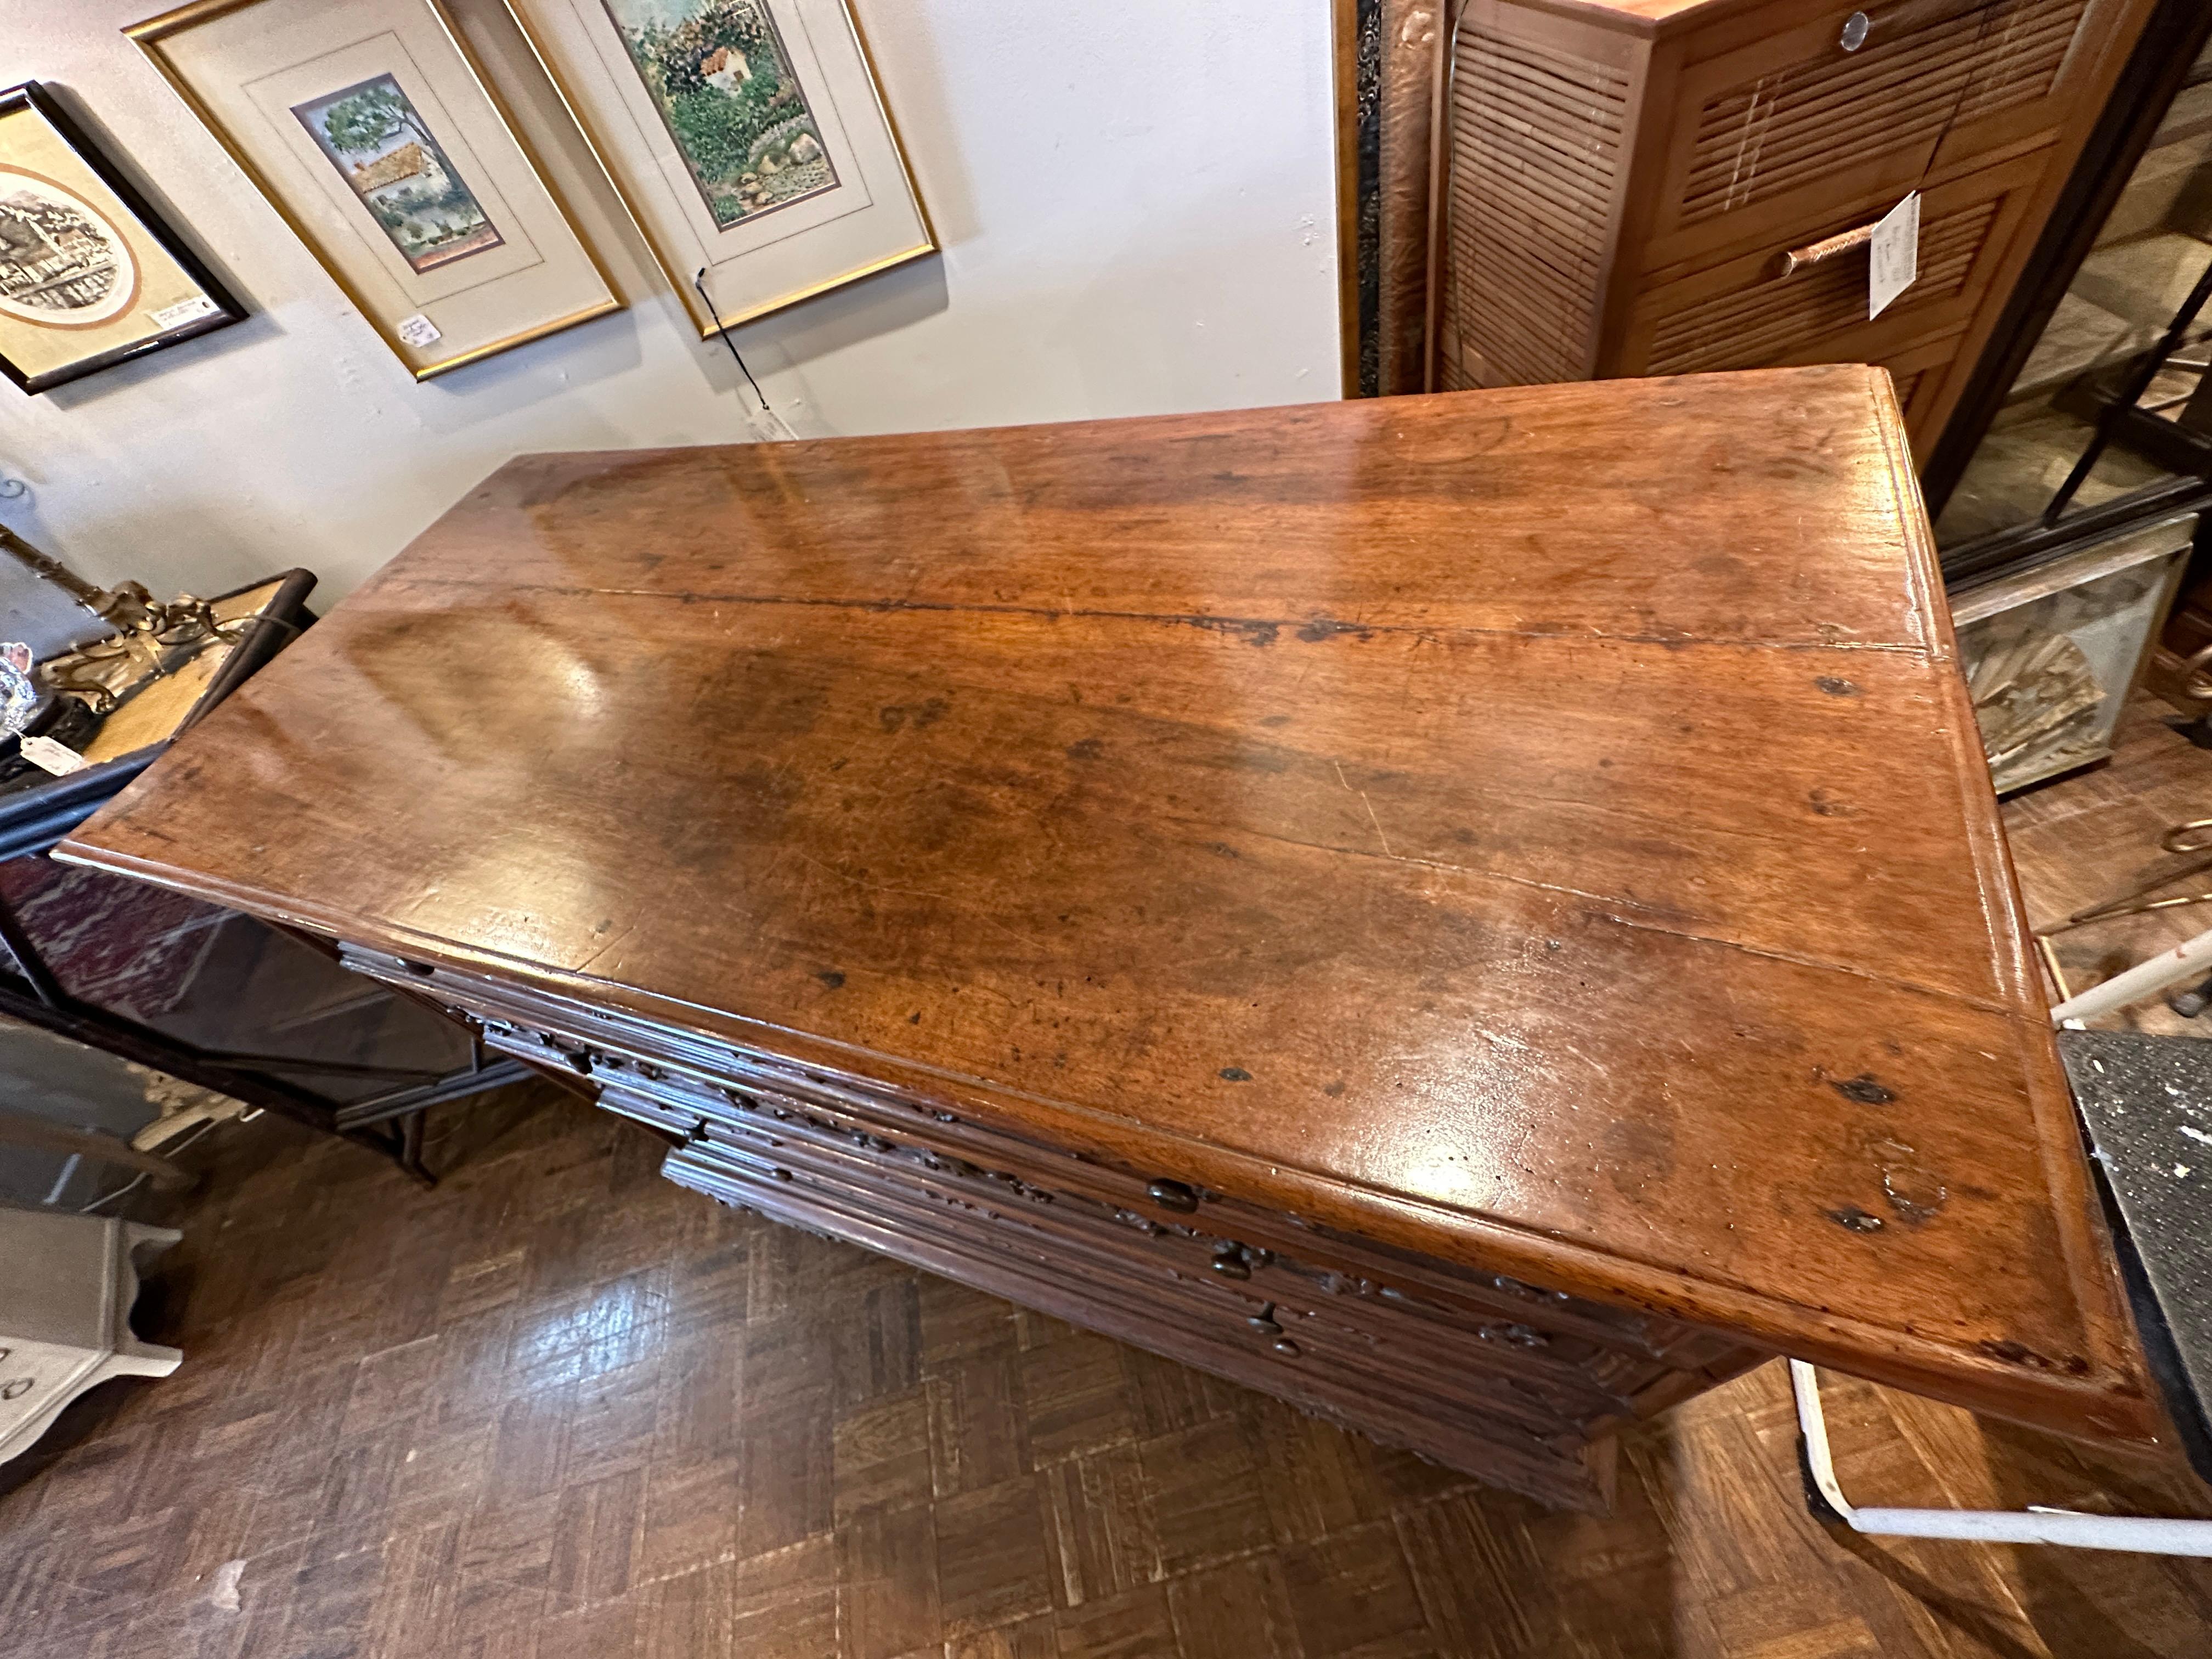 19th Century Belgium large chest of drawers in walnut wood. 
Four large drawers with beautifully carved panels and carved feet.  Wonderfully aged with beautiful patina.
All four drawers pulls in and out easily.  Great for dining room server with